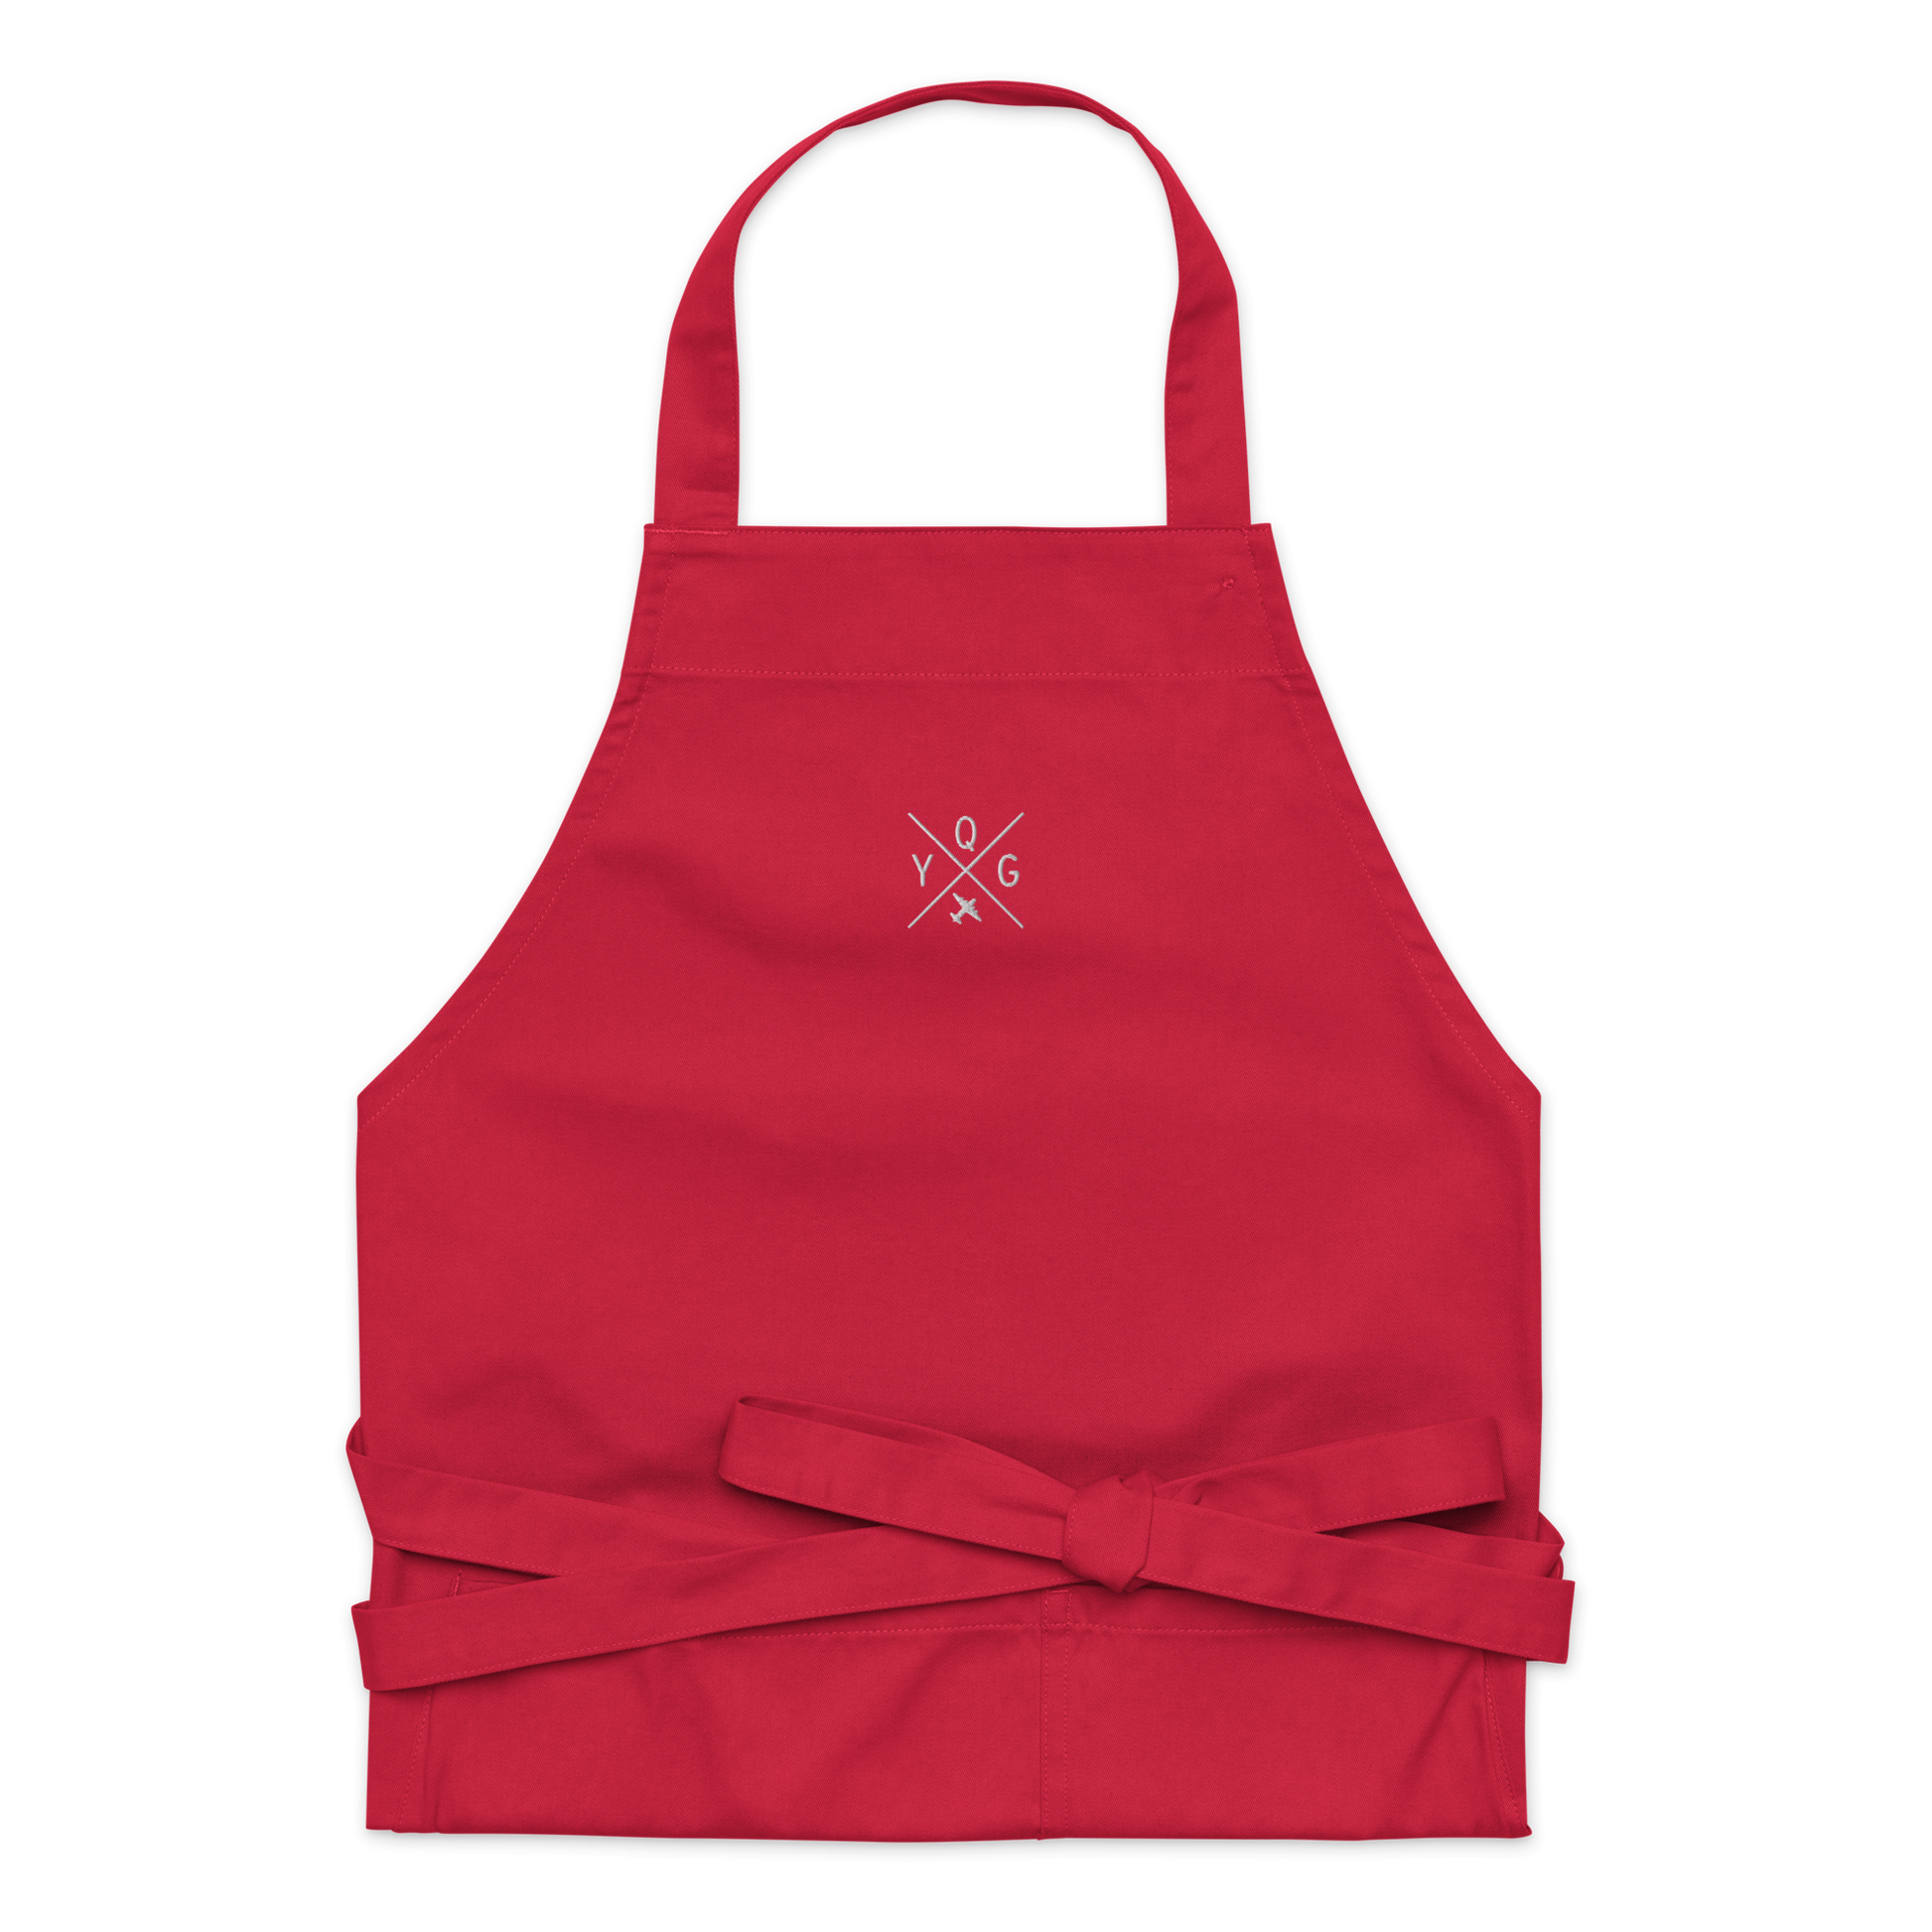 YHM Designs - YQG Windsor Organic Cotton Apron - Crossed-X Design with Airport Code and Vintage Propliner - White Embroidery - Image 05